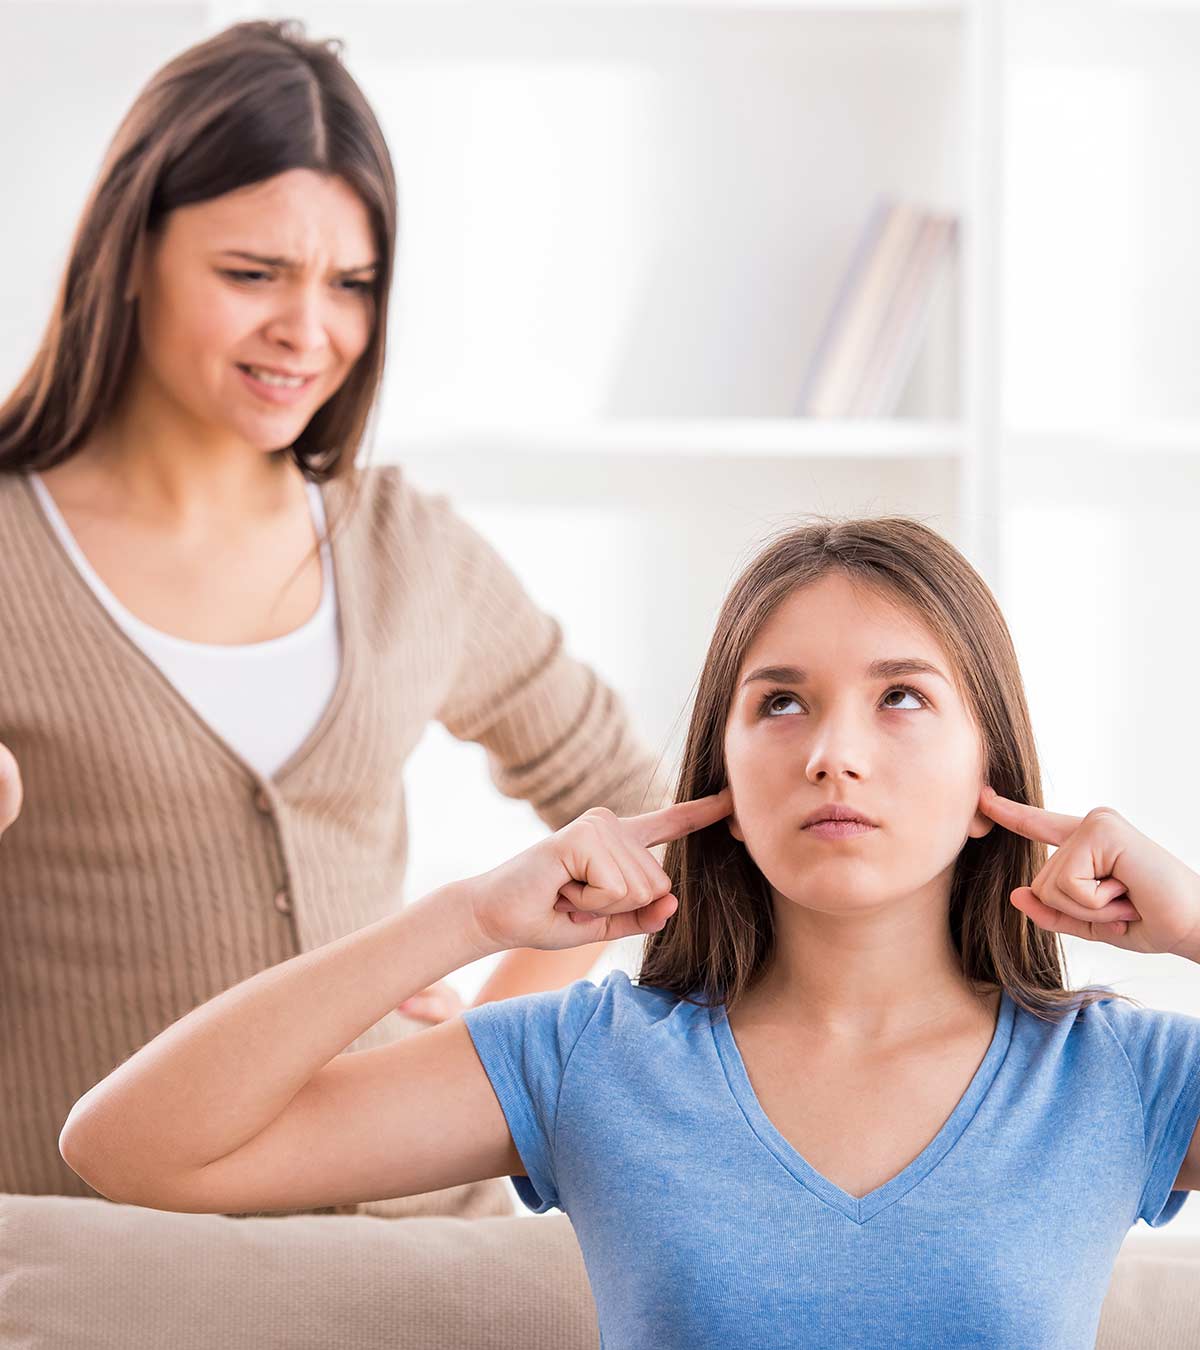 5 Effective Tips To Deal With Your Stubborn Teenager